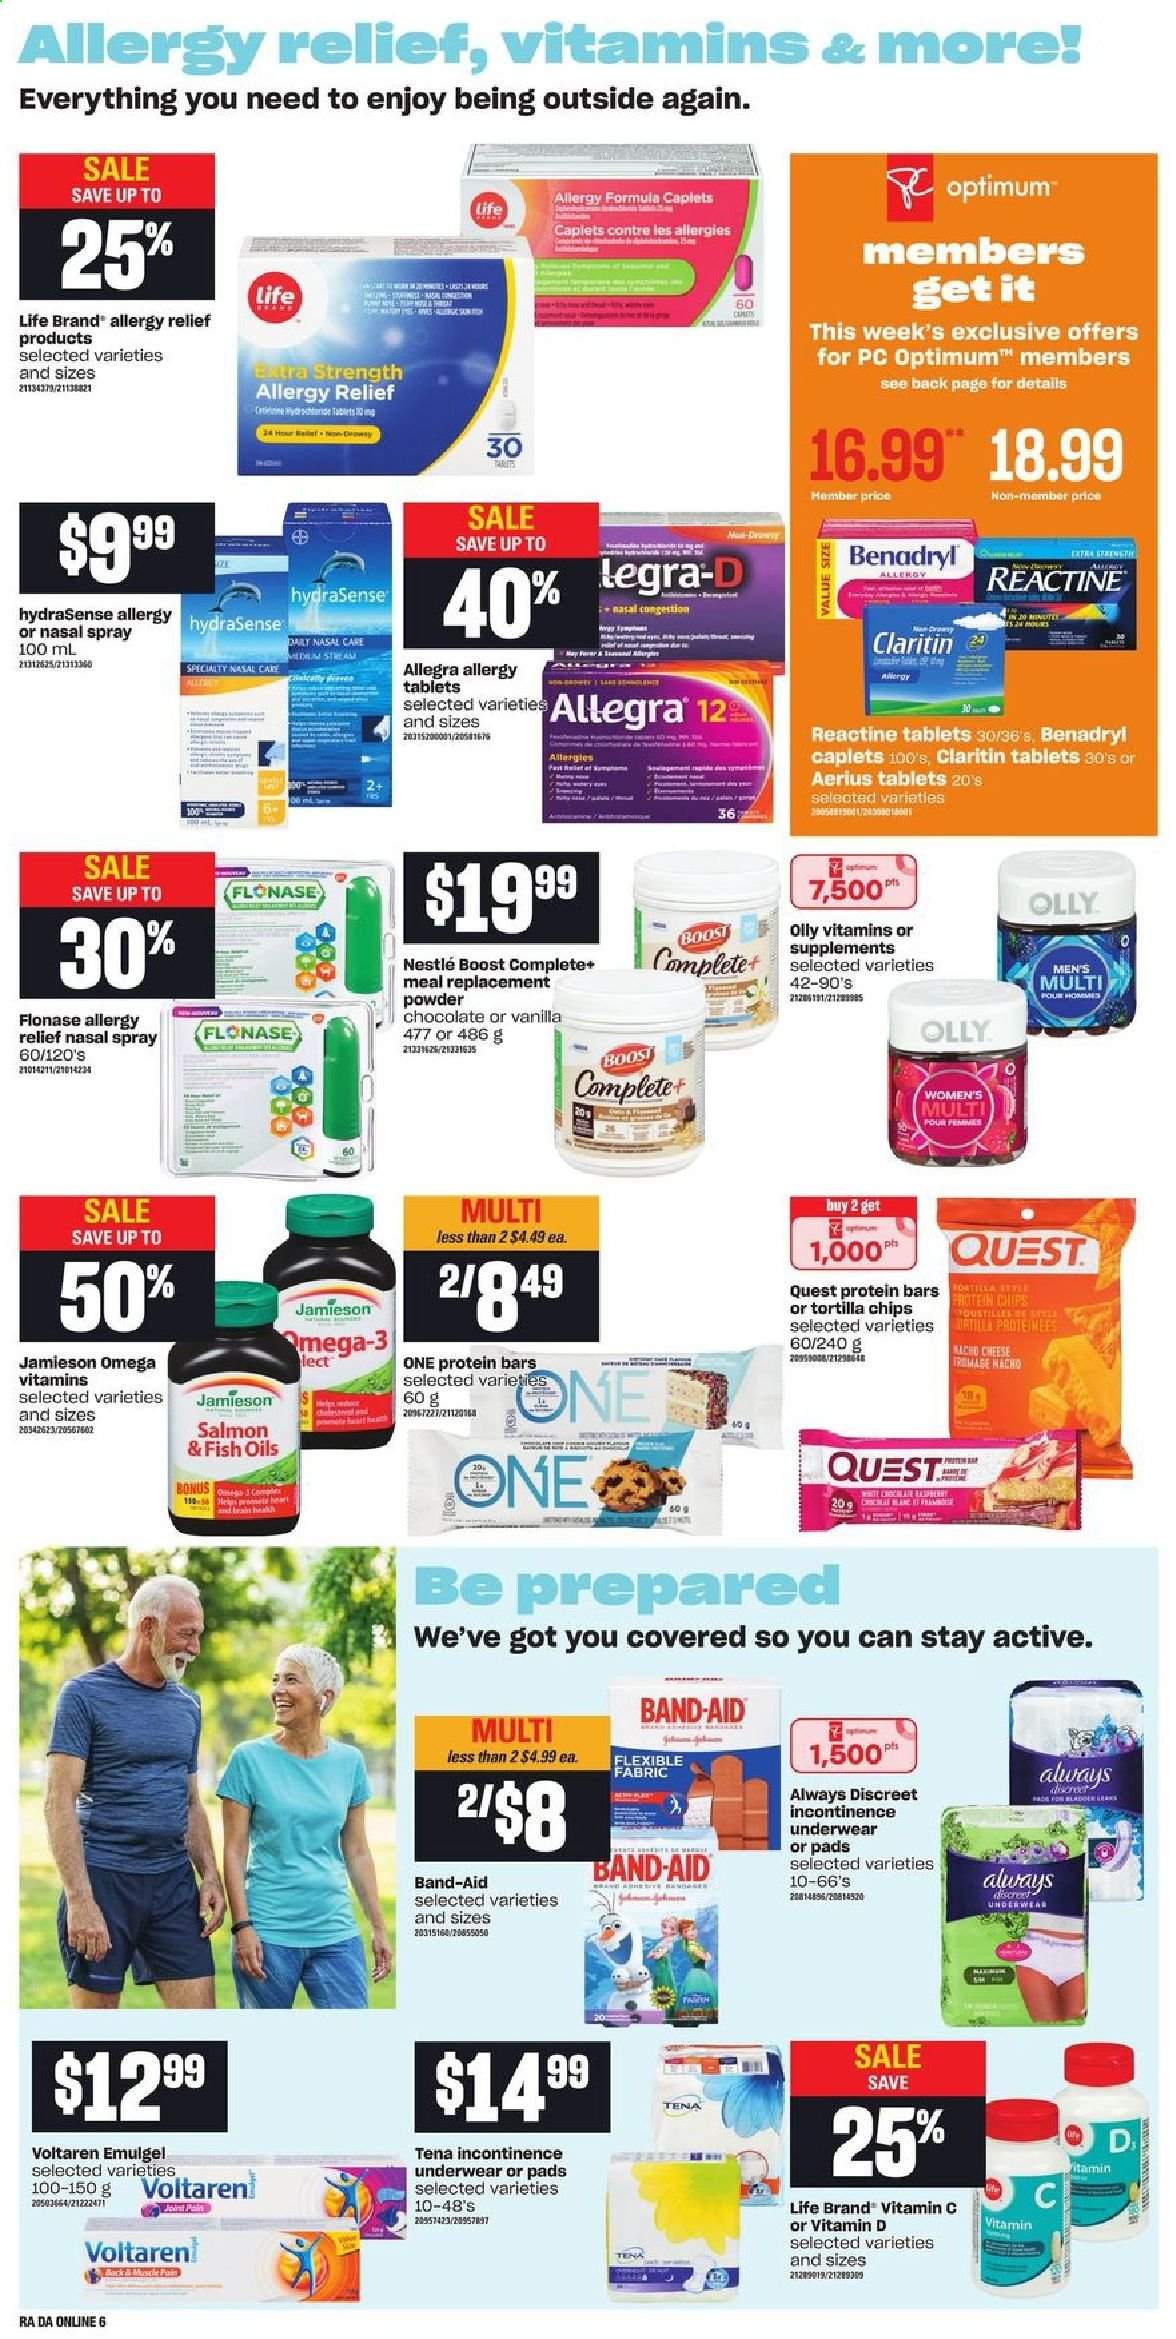 thumbnail - Atlantic Superstore Flyer - May 13, 2021 - May 19, 2021 - Sales products - salmon, fish, cheese, chocolate, tortilla chips, powder chocolate, protein bar, Boost, XTRA, Always Discreet, incontinence underwear, Optimum, vitamin c, nasal spray, allergy relief, Nestlé, chips. Page 10.